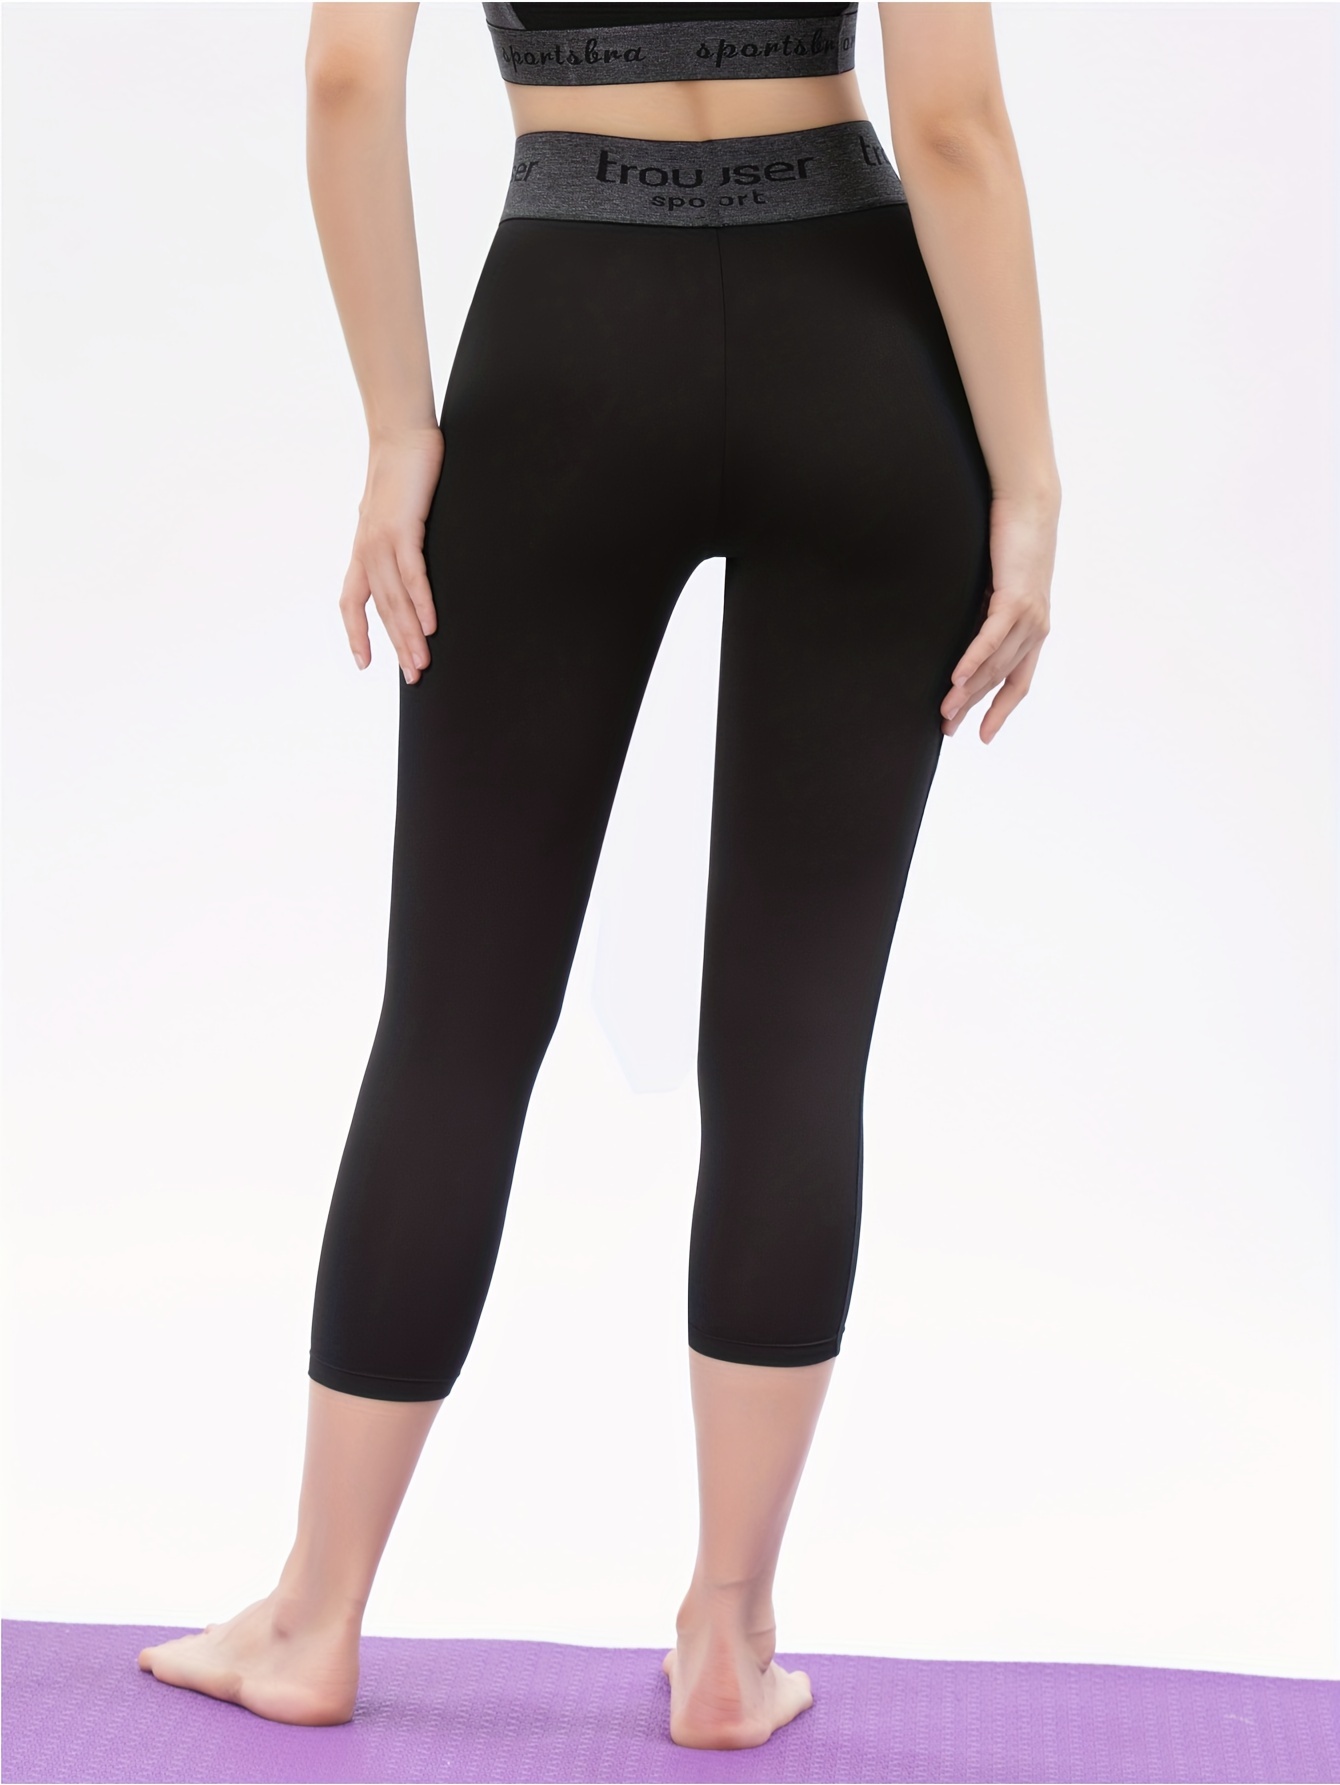 Assets Spanx Leggings Womens Small Black Shaping Slimming High Rise Stretchy